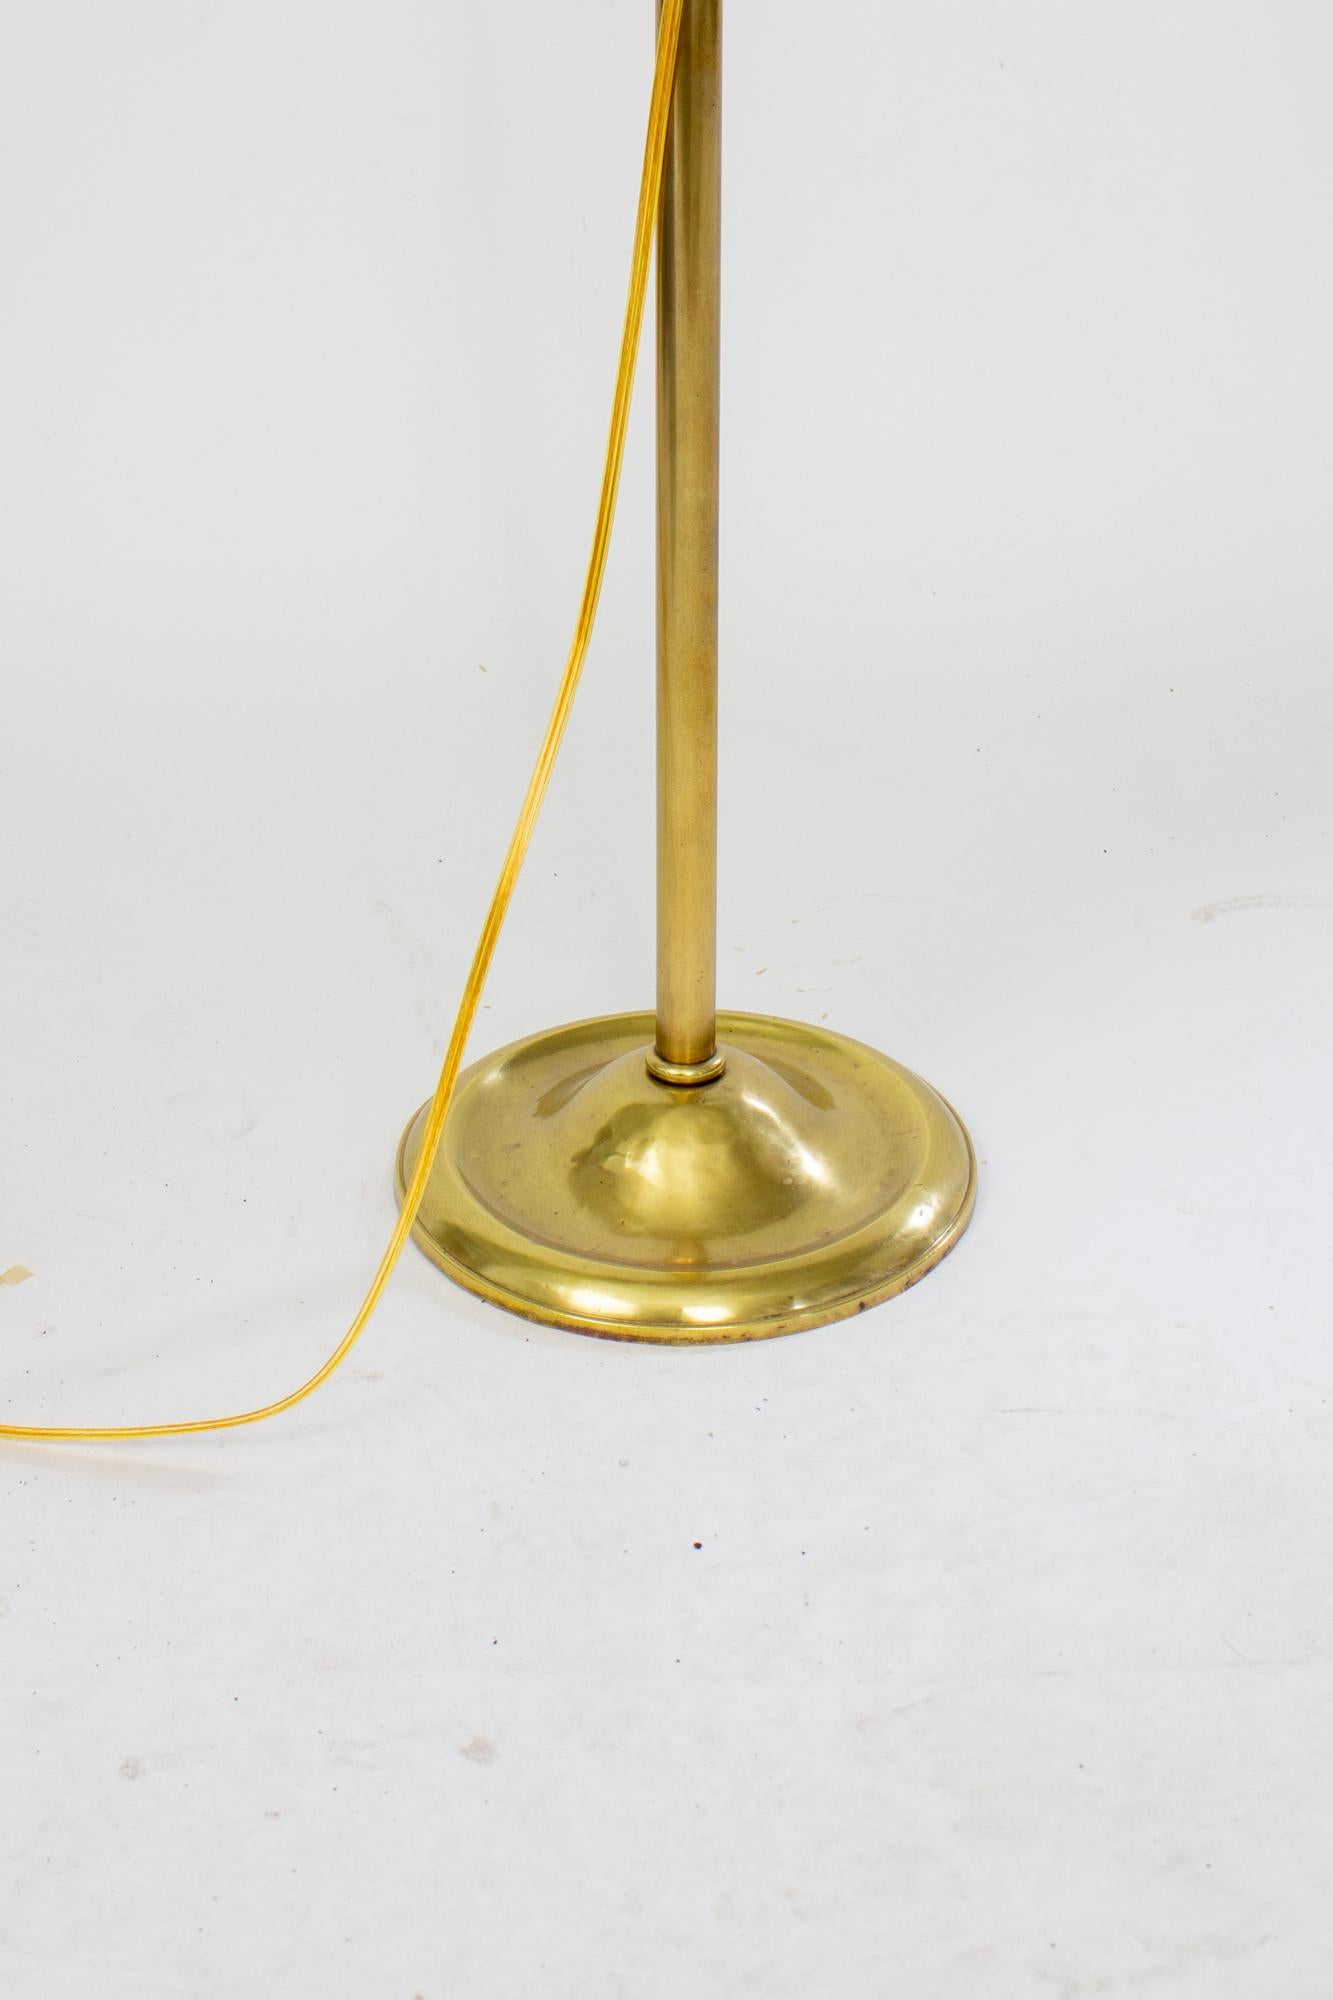 Early 20th Century Edward Miller & Co. Adjustable Bridge Lamp In Good Condition For Sale In Canton, MA